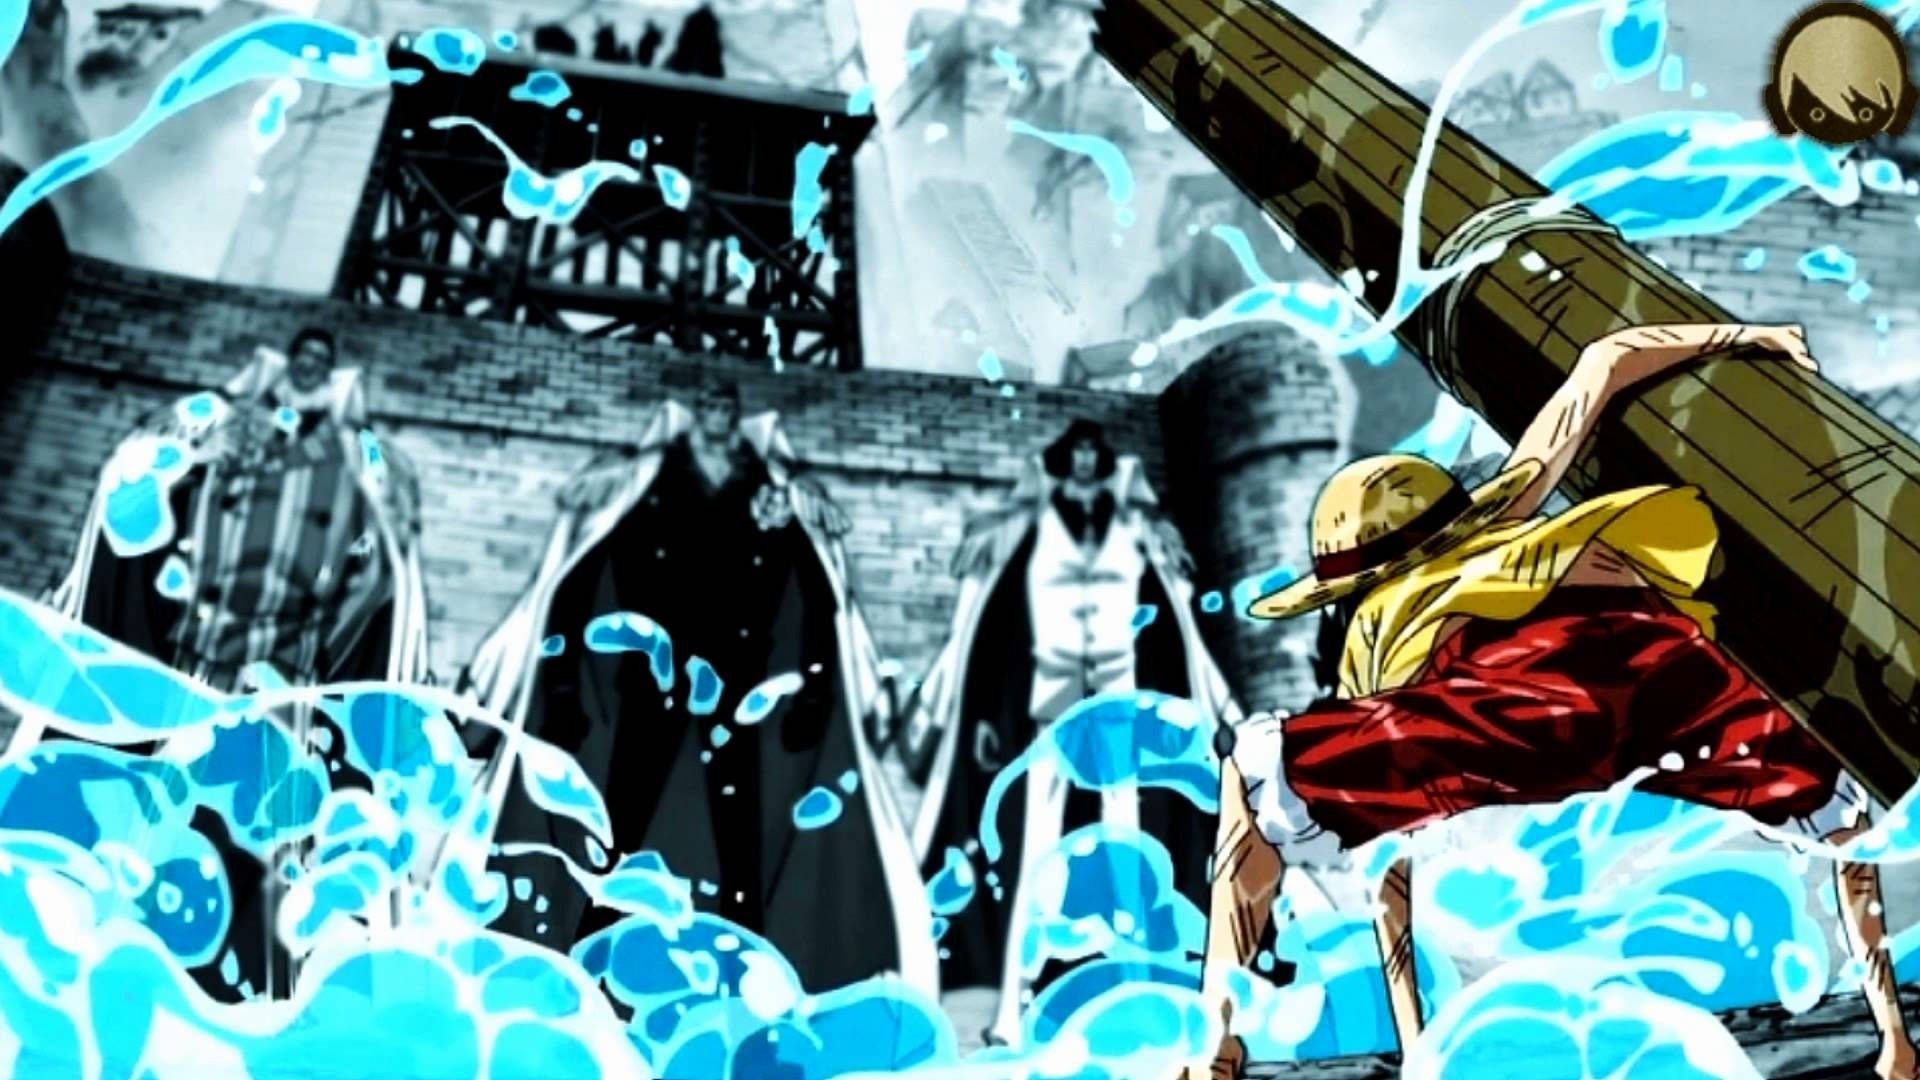 Monkey D. Luffy ready to take the world by storm Wallpaper